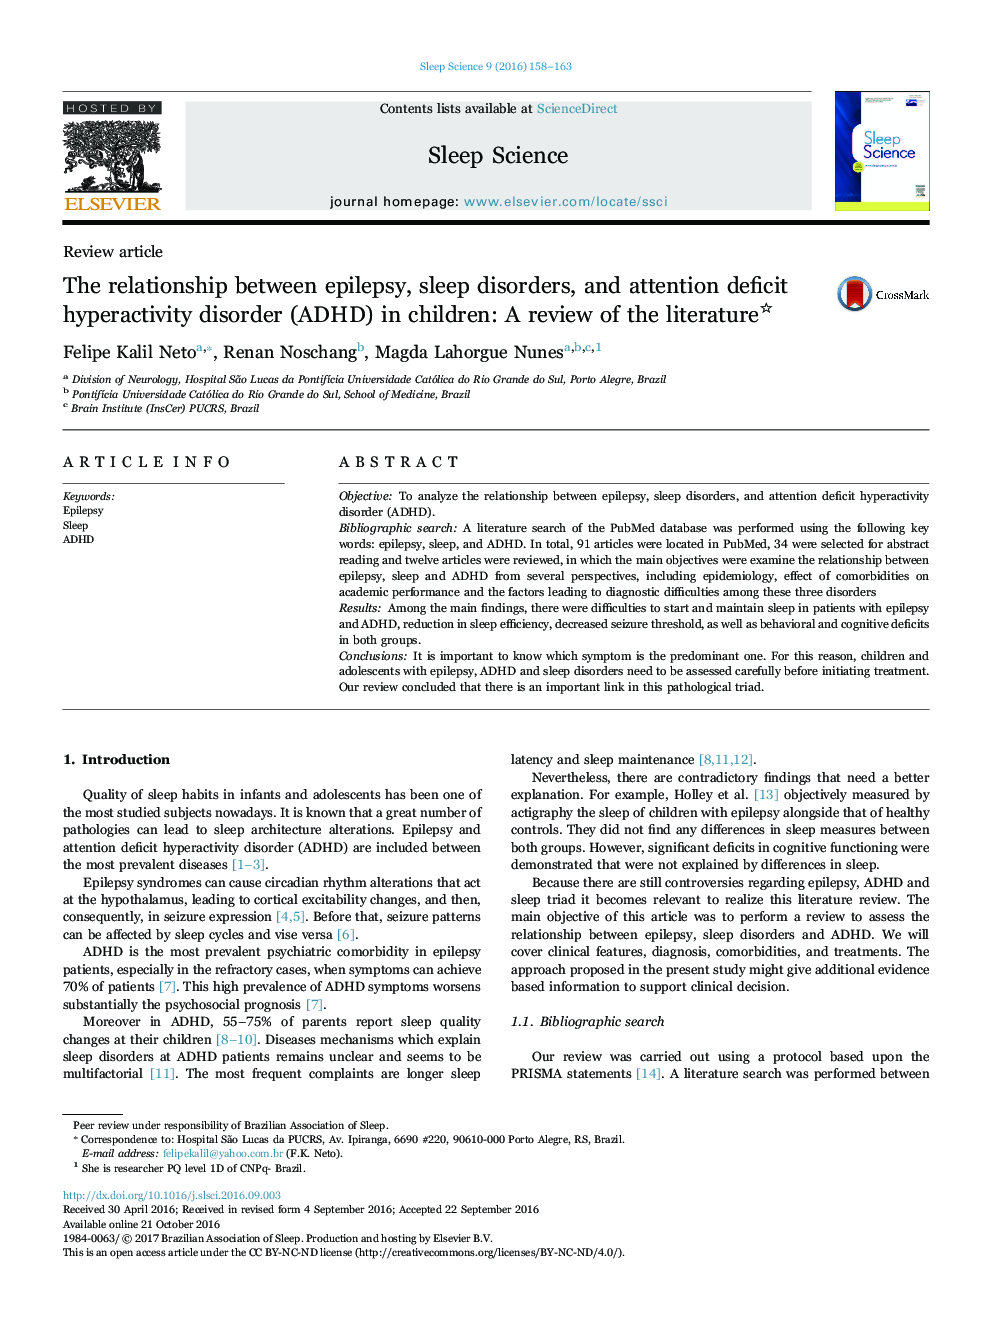 Review articleThe relationship between epilepsy, sleep disorders, and attention deficit hyperactivity disorder (ADHD) in children: A review of the literature